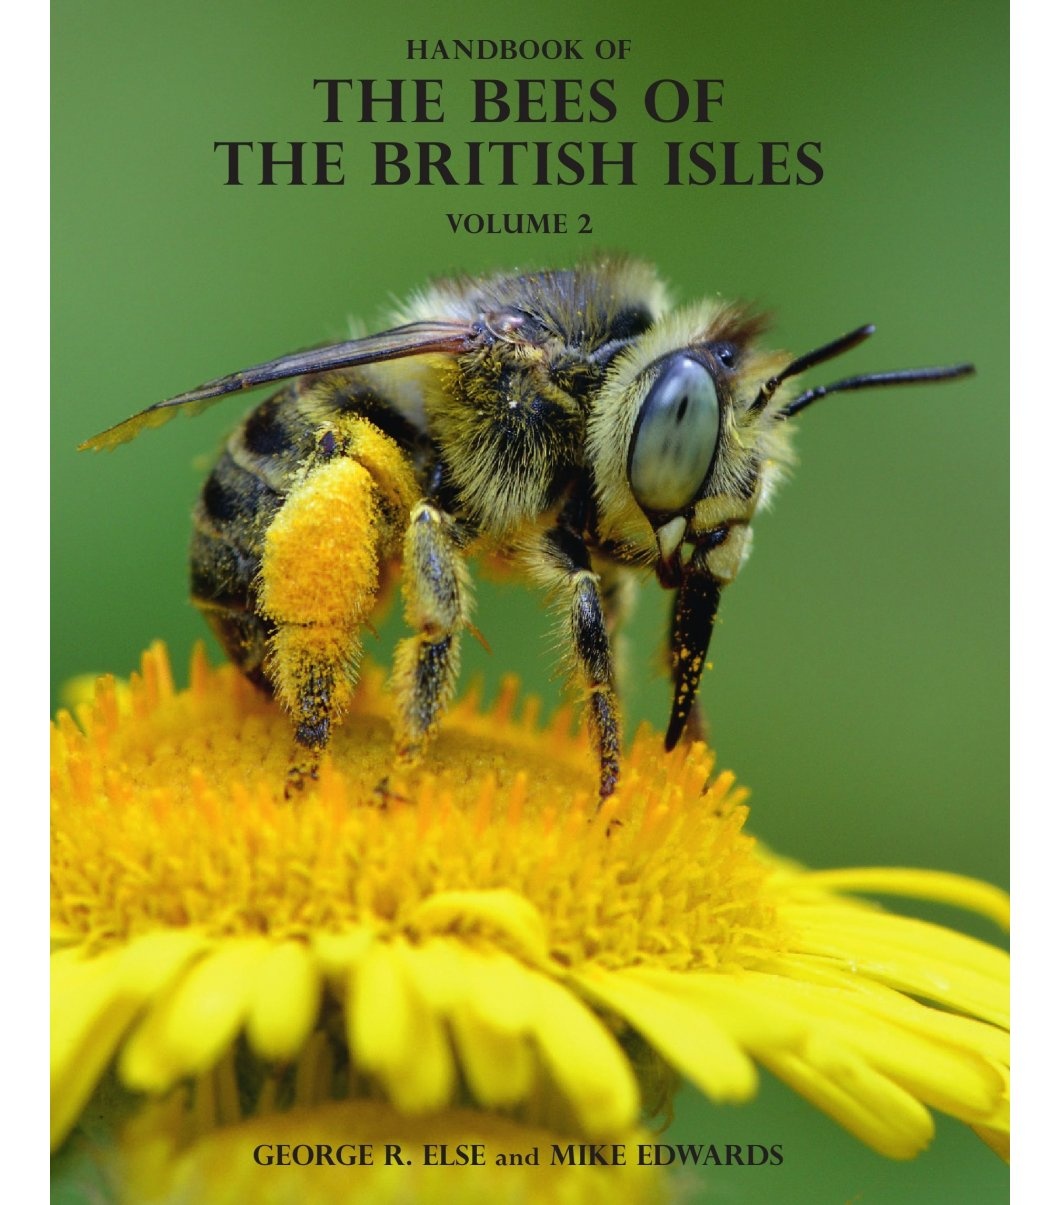 Field Guide To The Bees Of Great Britain And Ireland From Summerfield Books